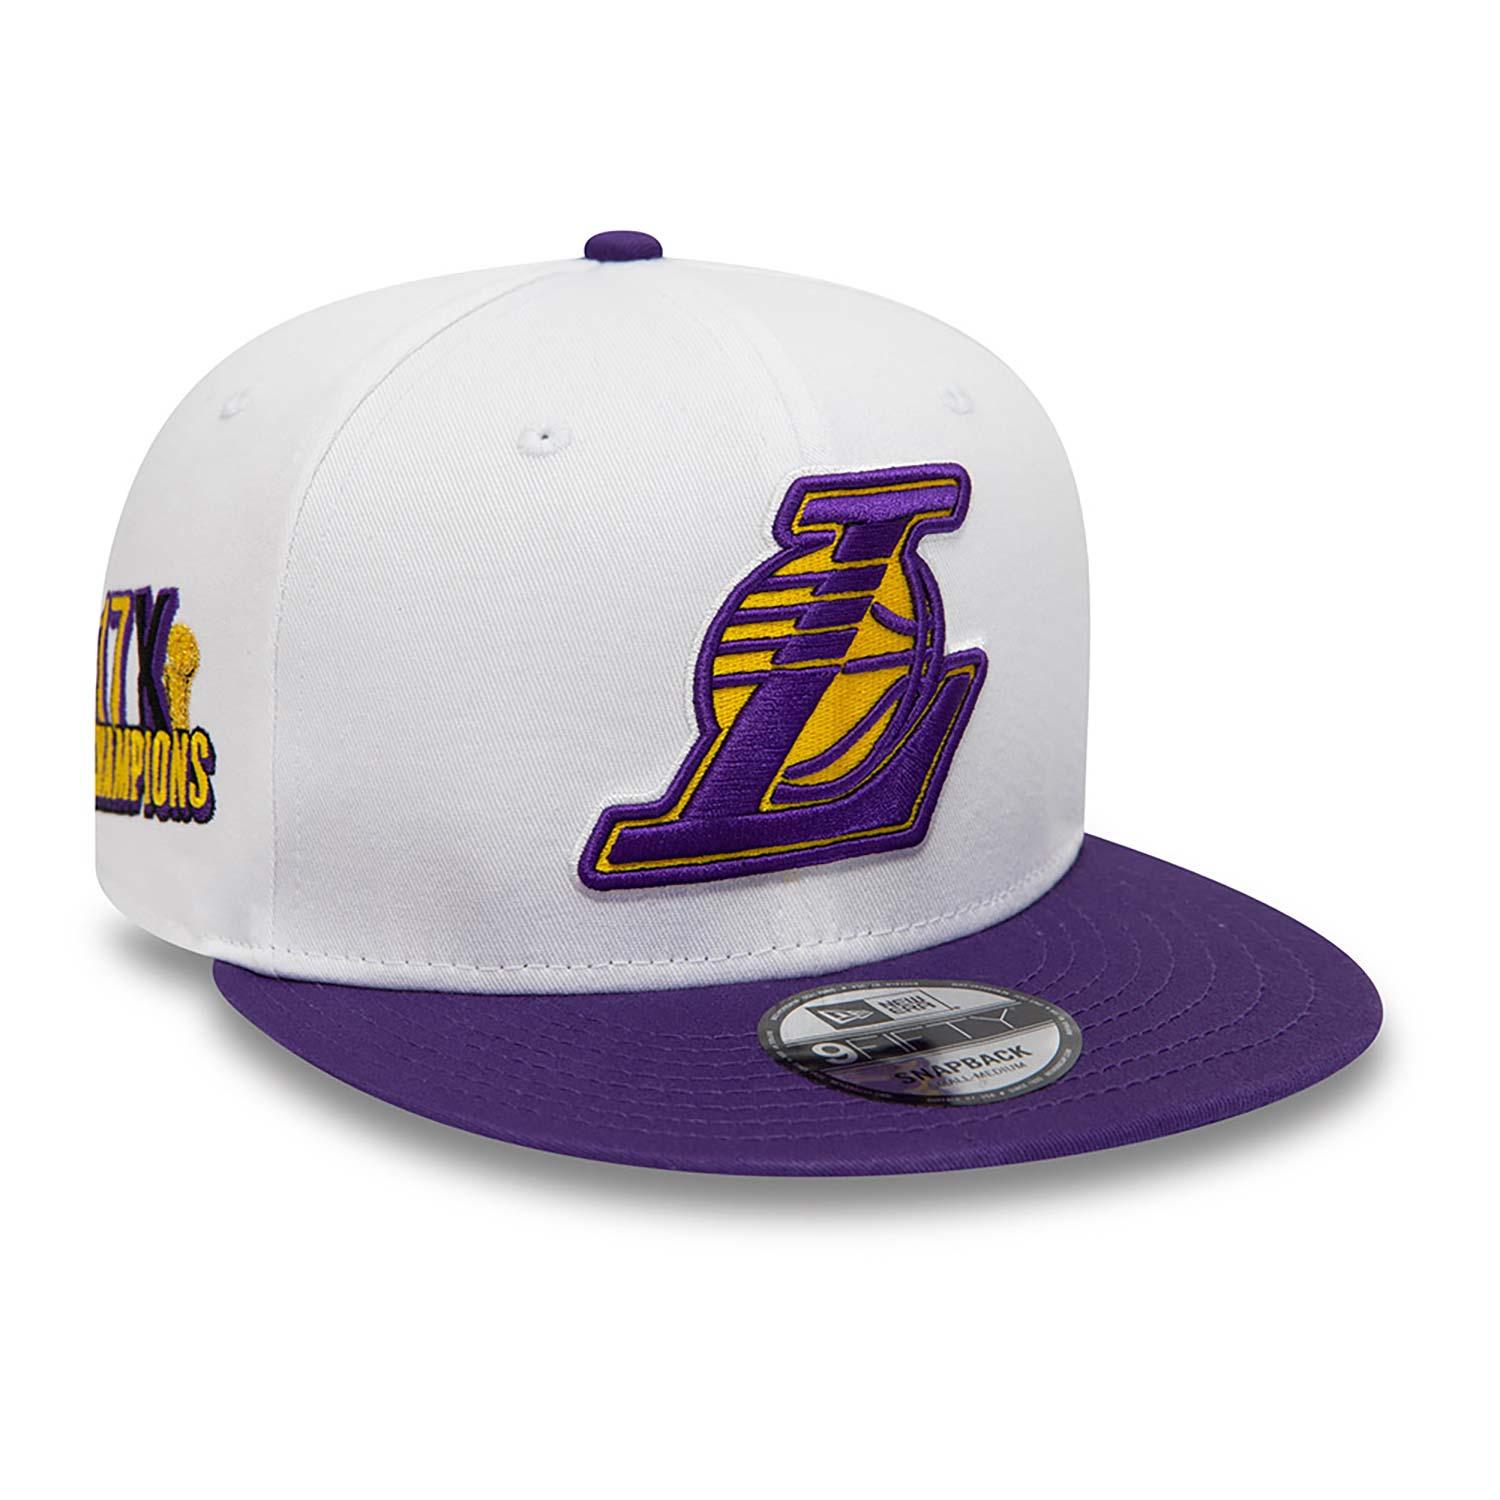 Buy NBA LOS ANGELES LAKERS CHAMPIONS PATCH 9FIFTY SNAPBACK CAP for